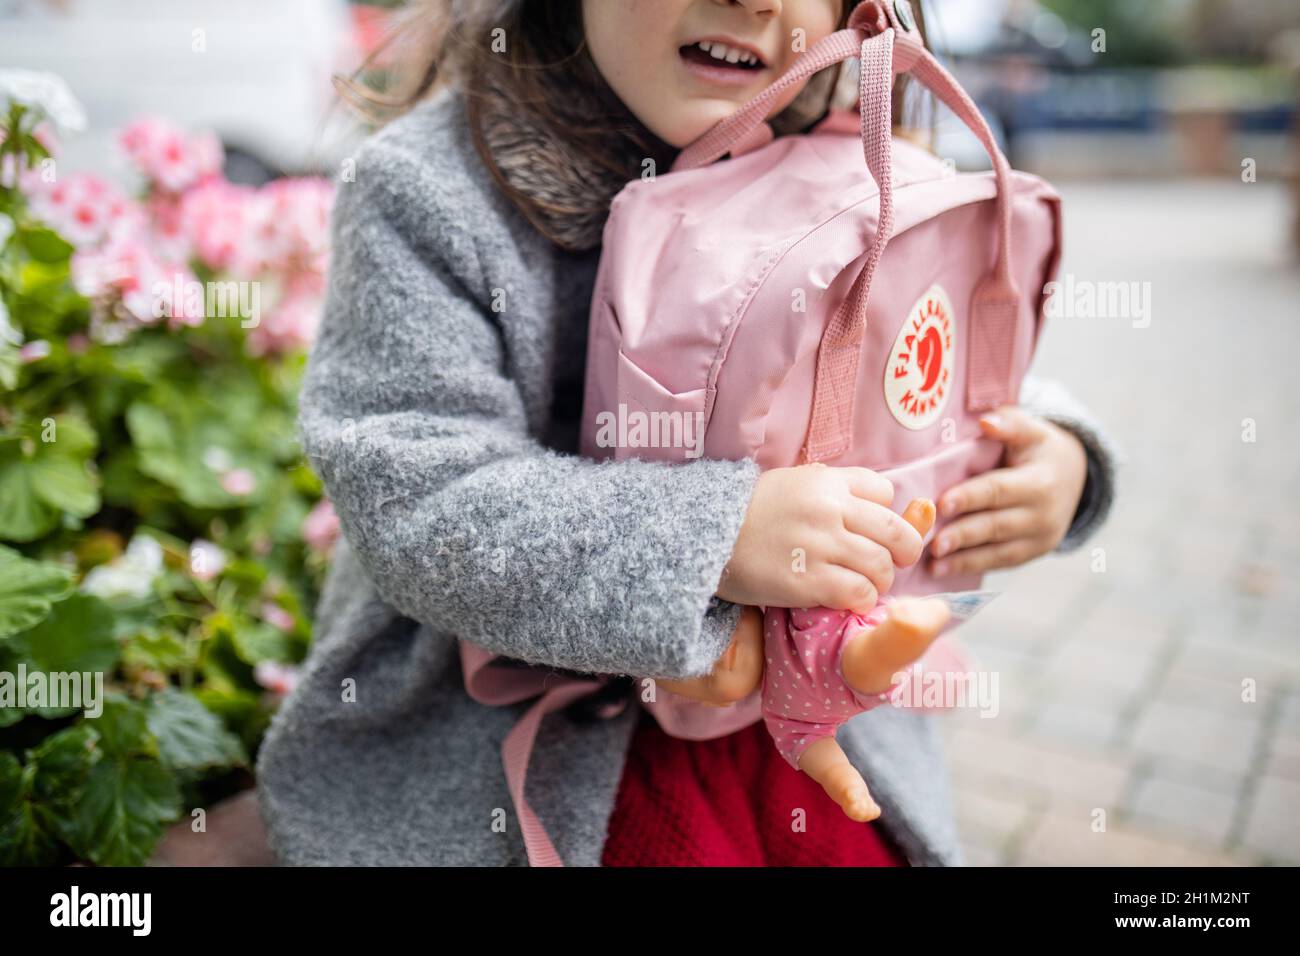 London, UK - November 4, 2020: Happy little girl with flowers behind her hugging pink Fjallraven backpack and small doll. Young child holding pink ruc Stock Photo